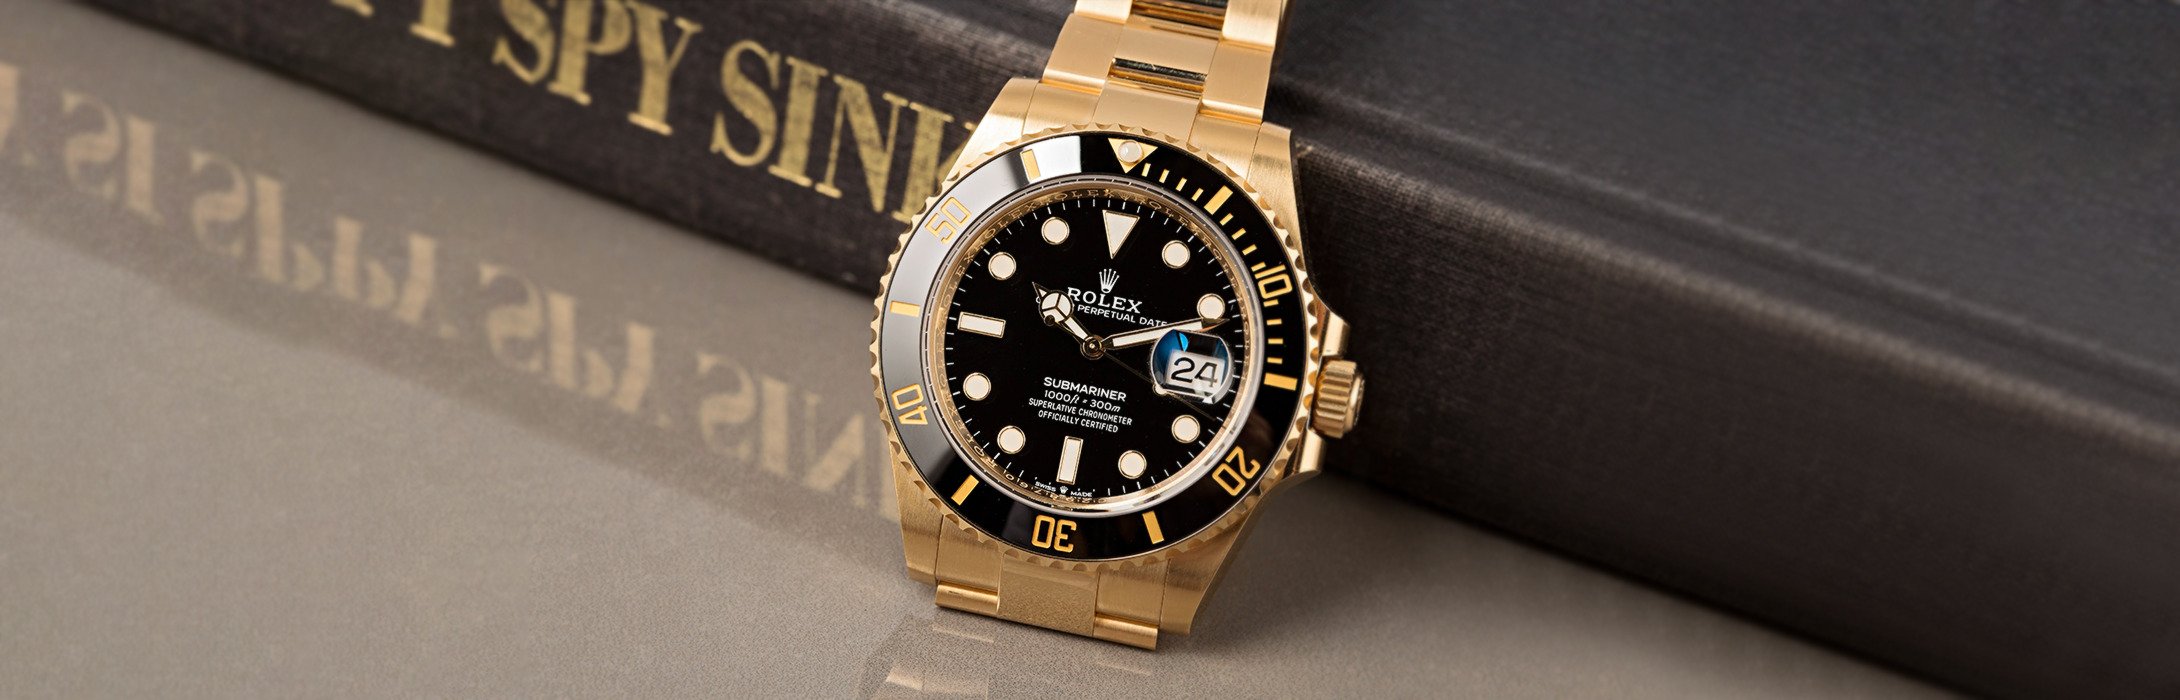 The First Rolex Submariner Gold Watch - Bob's Watches